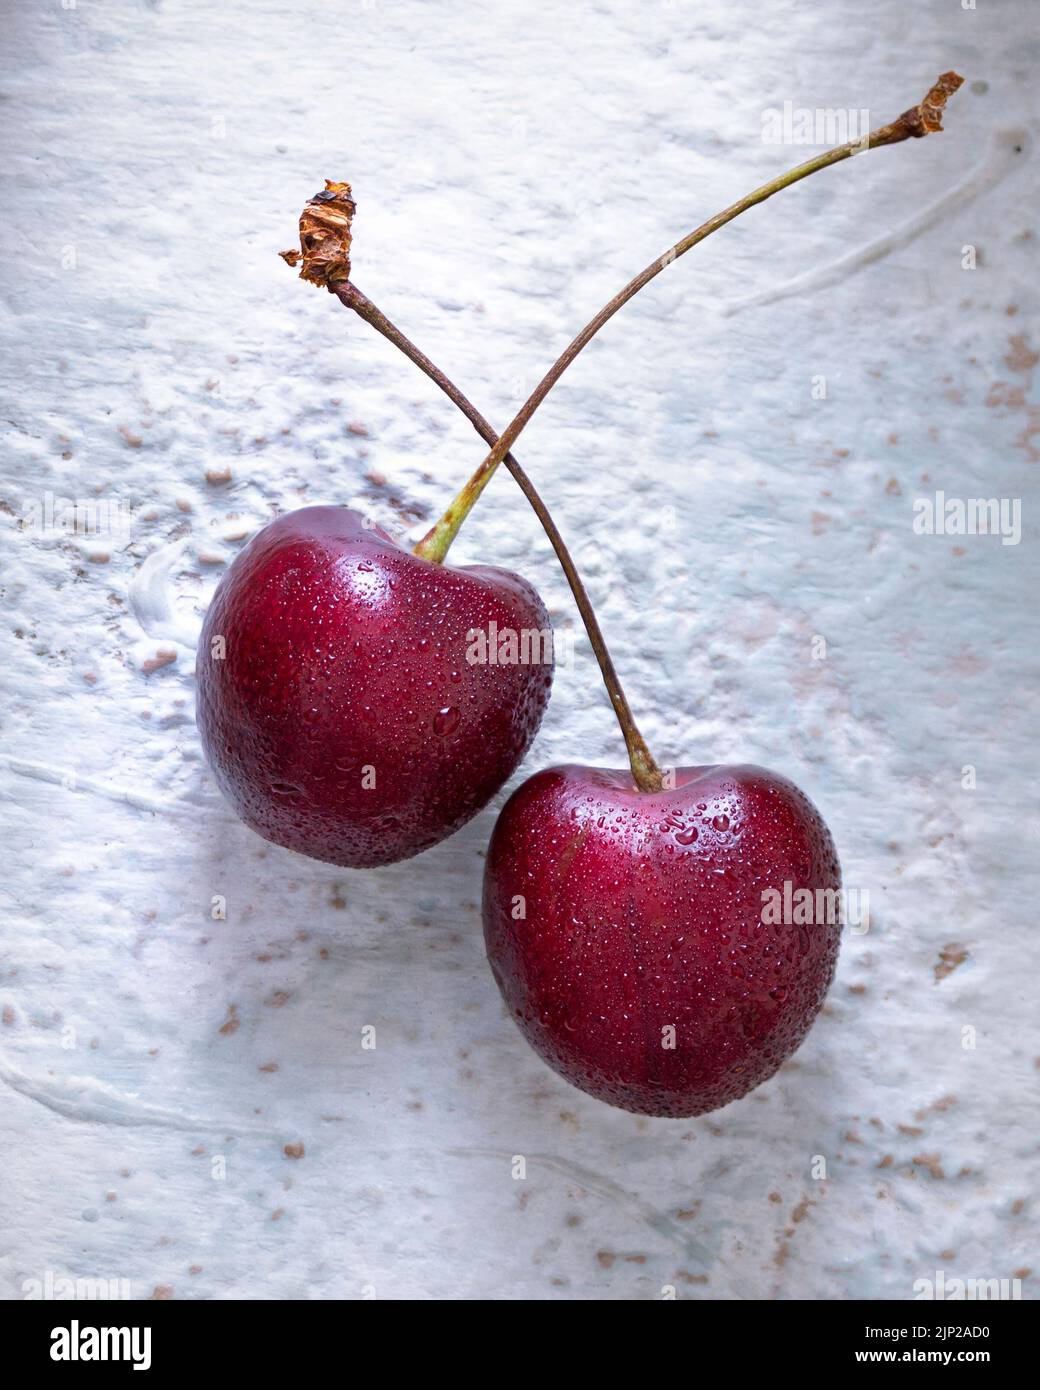 Two fresh cherries on a textured white surface Stock Photo